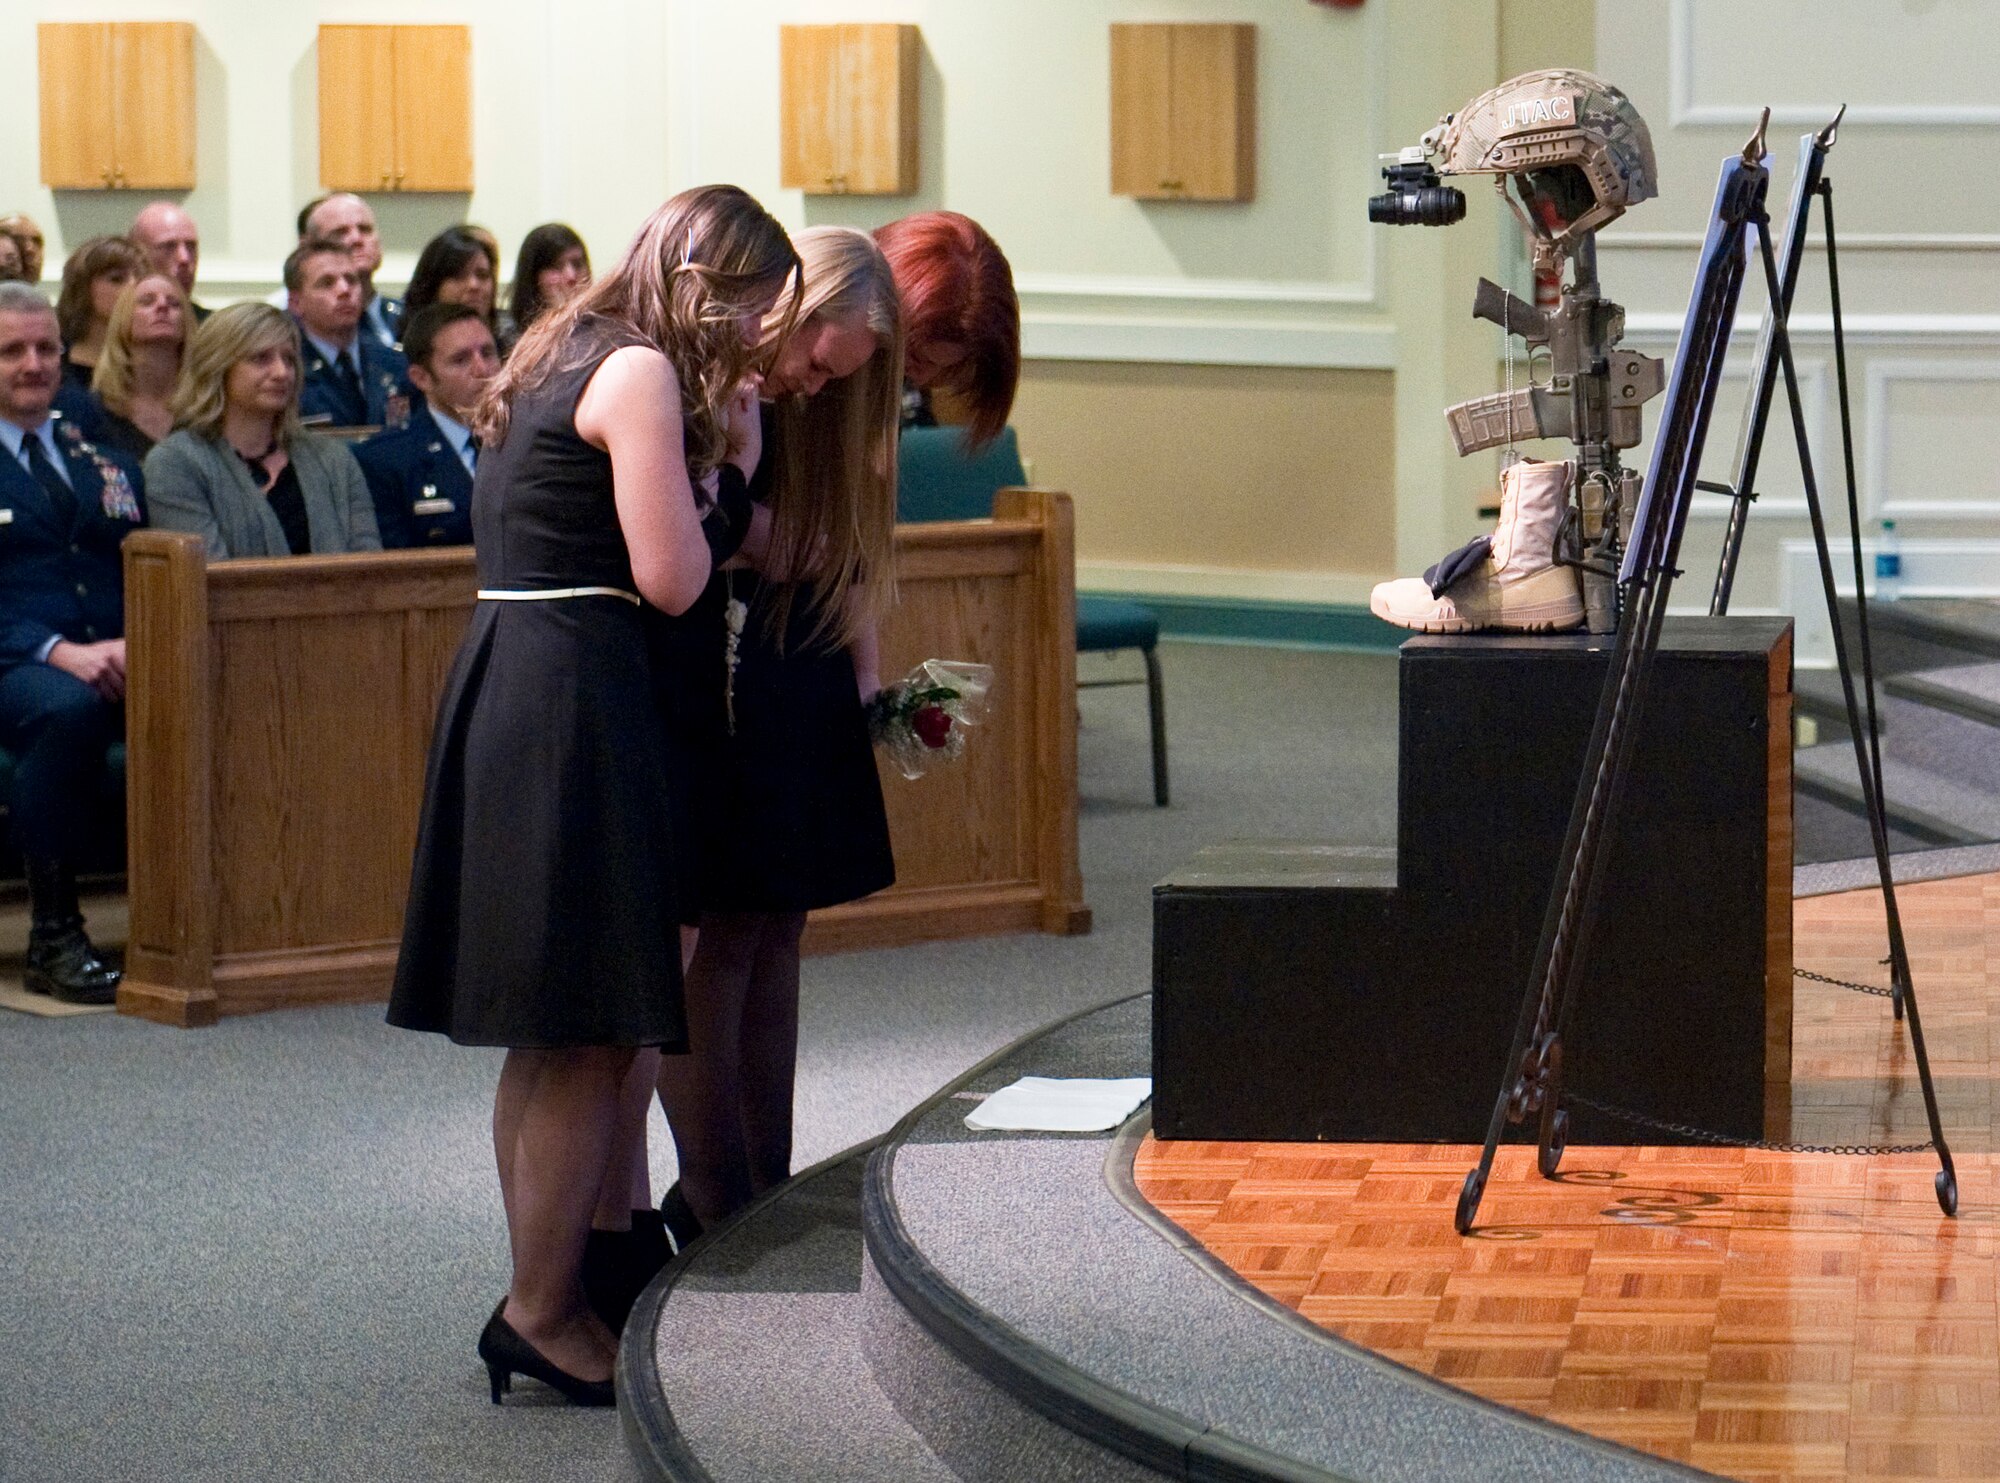 (From left to right) The widow and eldest child of Master Sgt. Josh Gavulic grieve his loss alongside another family member during a memorial service at Fort Benning's Main Post Chapel on February 28, 2014. He left behind six children. He was buried at the Fort Mitchell National Veteran's Cemetery just outside the gates of Fort Benning following a funeral service March 3, 2014 at Cascade Hills Baptist Church in Columbus, Ga., (U.S. Army Photo by Patrick Albright/MCoE Photographer)
